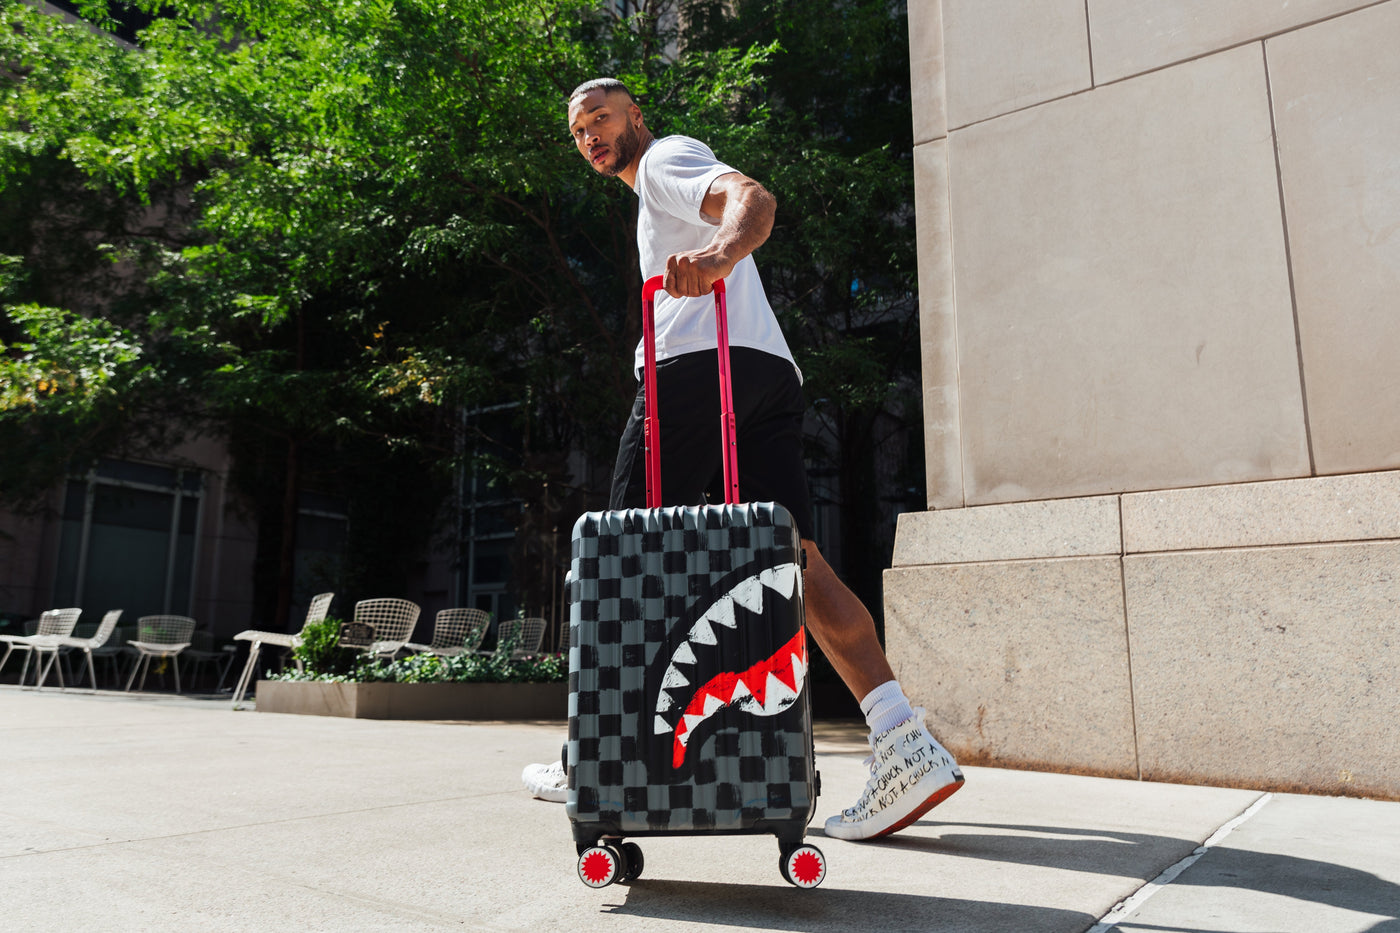 SHARKS IN PARIS PAINT GREY CARRY-ON LUGGAGE